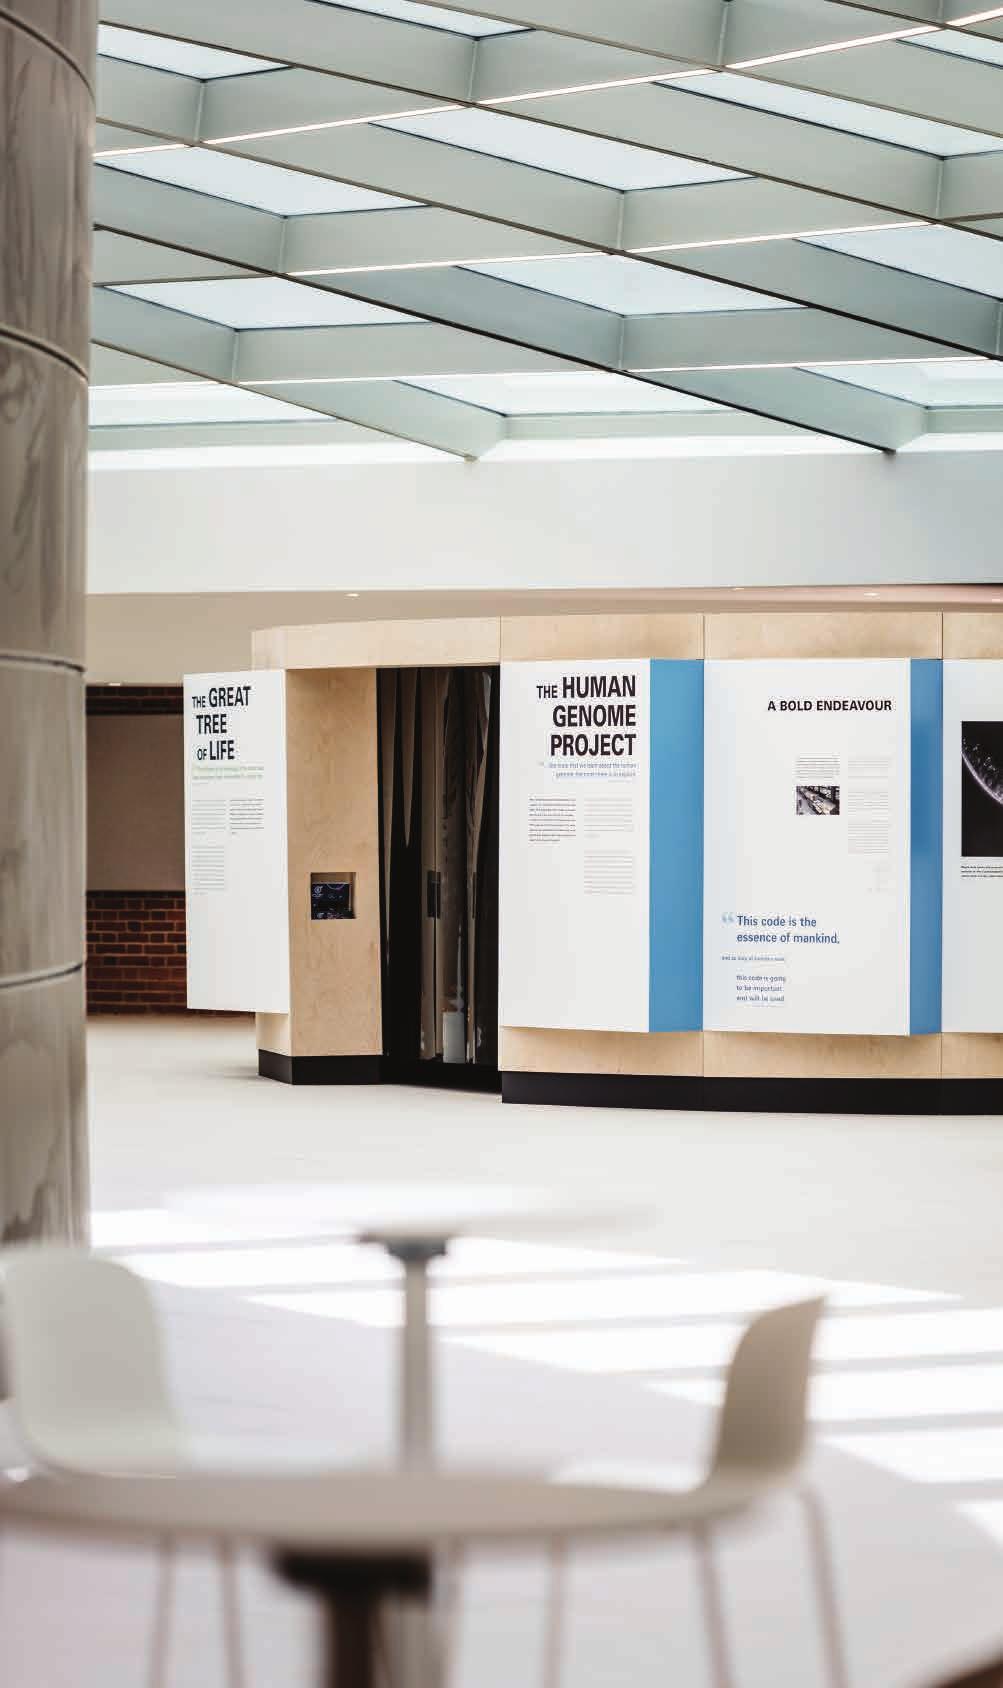 The Cultural Zone within the exhibition area is designed to encouraging discussion around the